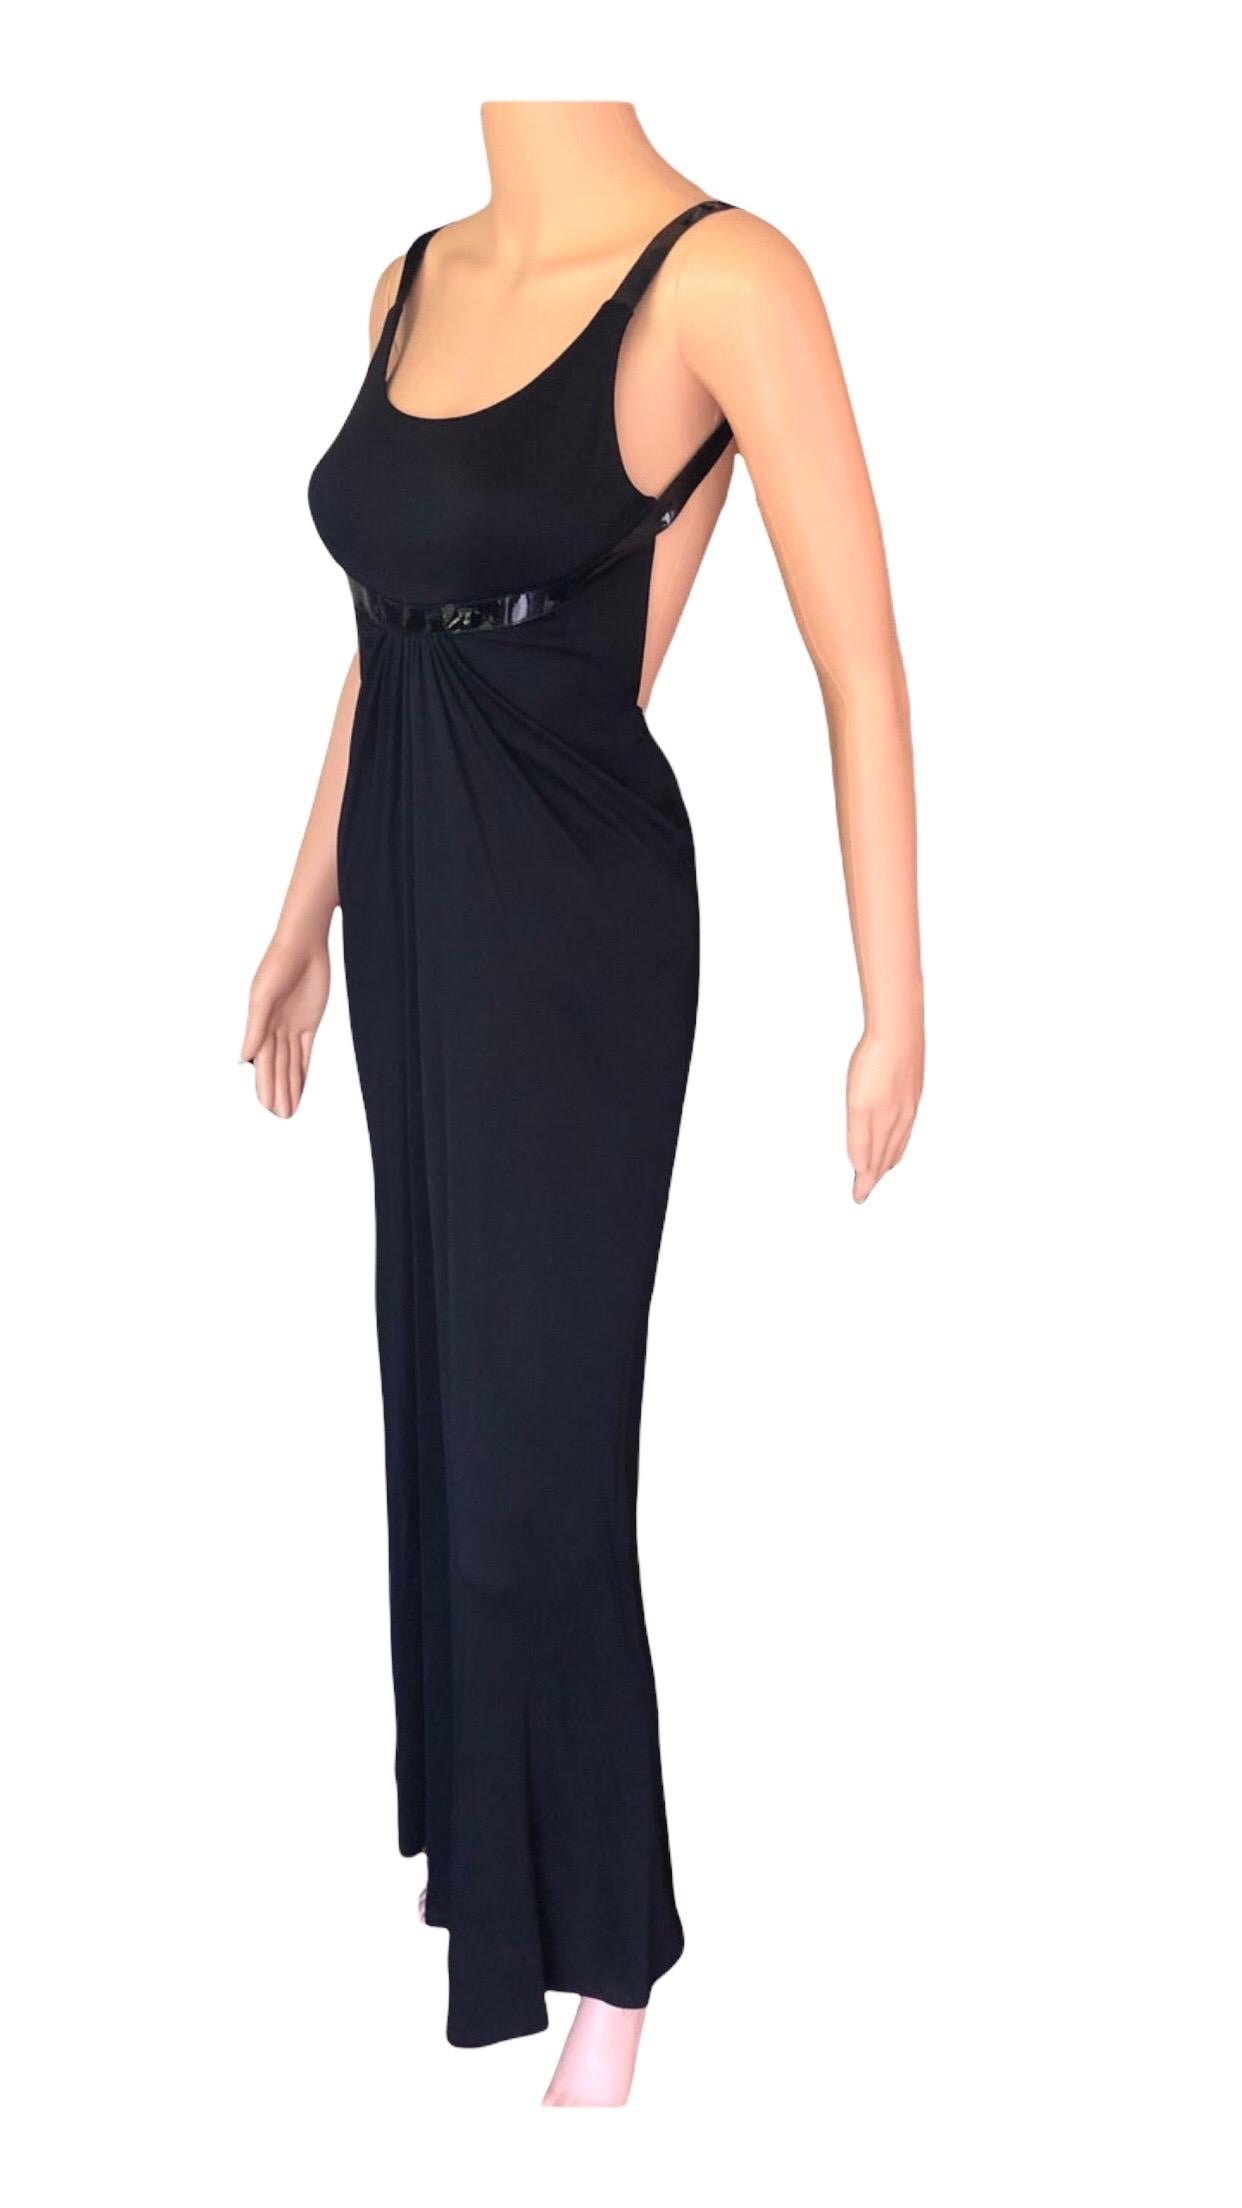 1999 Gucci by Tom Ford Silk Draped Open Back Black Dress Gown For Sale 3